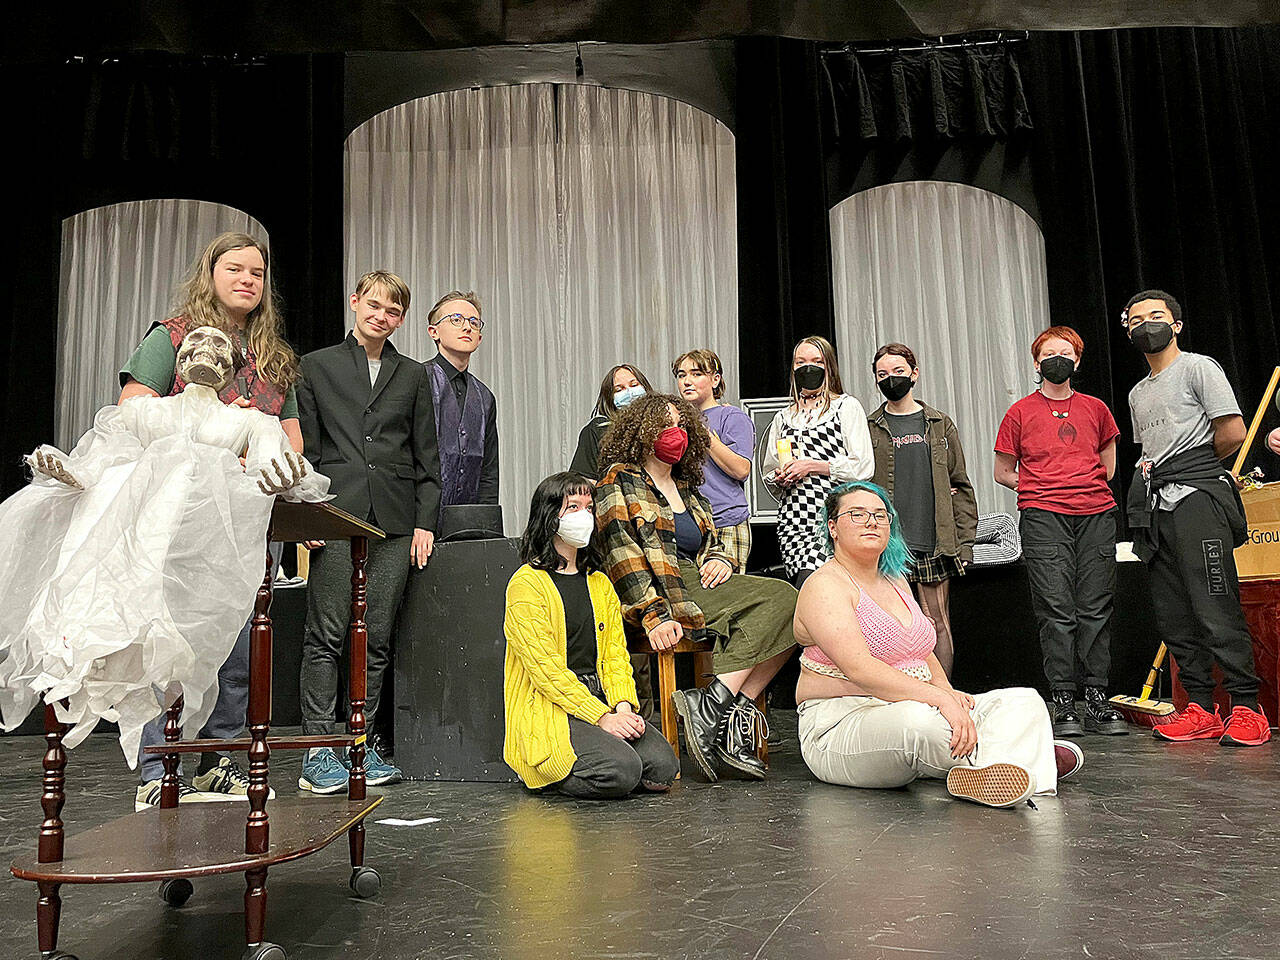 (Andy James Photo) The cast of “A Spirited Manor,” posing with the show’s spooky mascot, Yulia (in lace dress) includes (back row, left to right) Japhy Tsaitsenhoven, Bishop Townsend, Nathan Campbell, Isaac Huff, Chloe Bay, Harper Hobson, El Otto, Chris Wechkin, Richard Barrett-Wood, and (front row, left to right) Phoebe Ray, Raena Joyce, Ari Officer. Not pictured: Ian Ingalls.